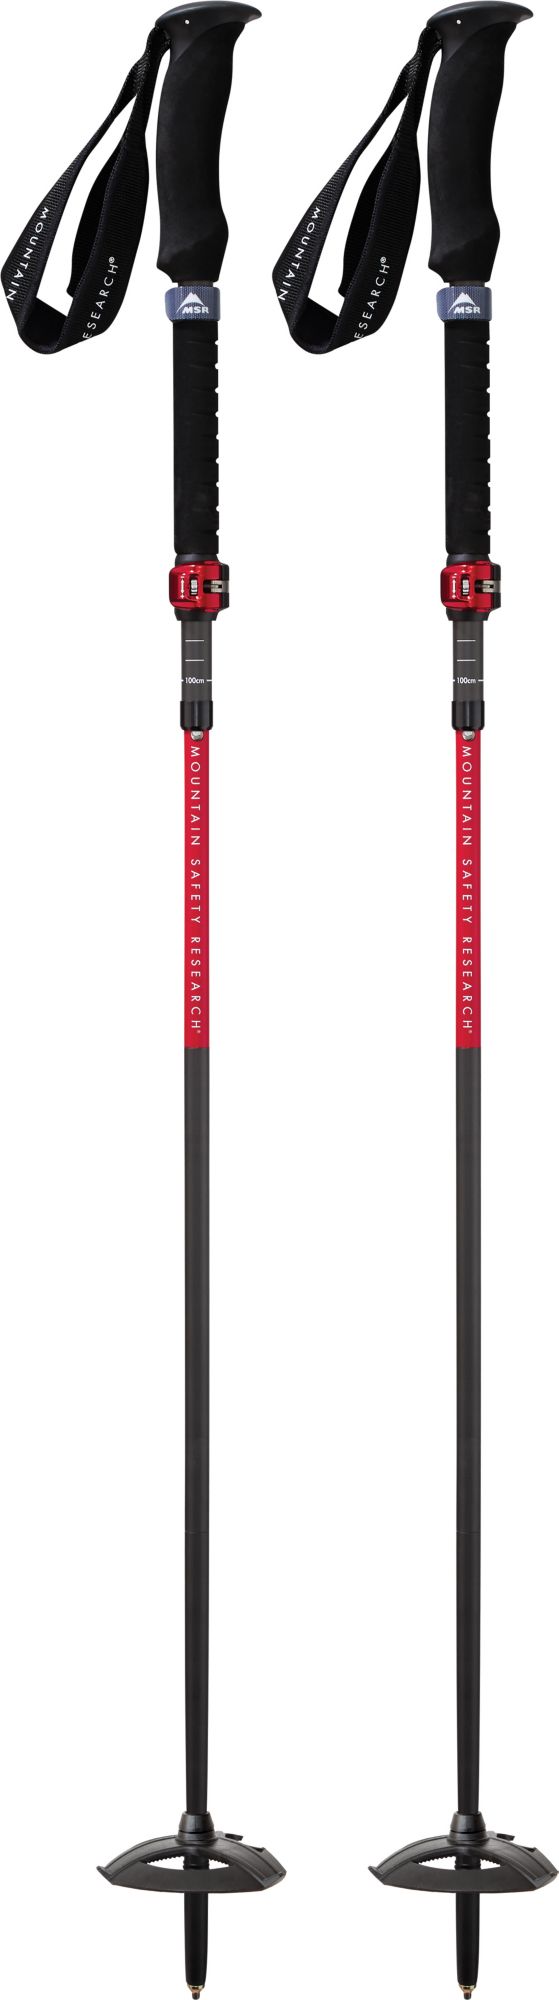 Photos - Other for Winter Sports MSR Dynalock Ascent Carbon Poles Small 21MSRUDYNLCKSCNTCSSP 